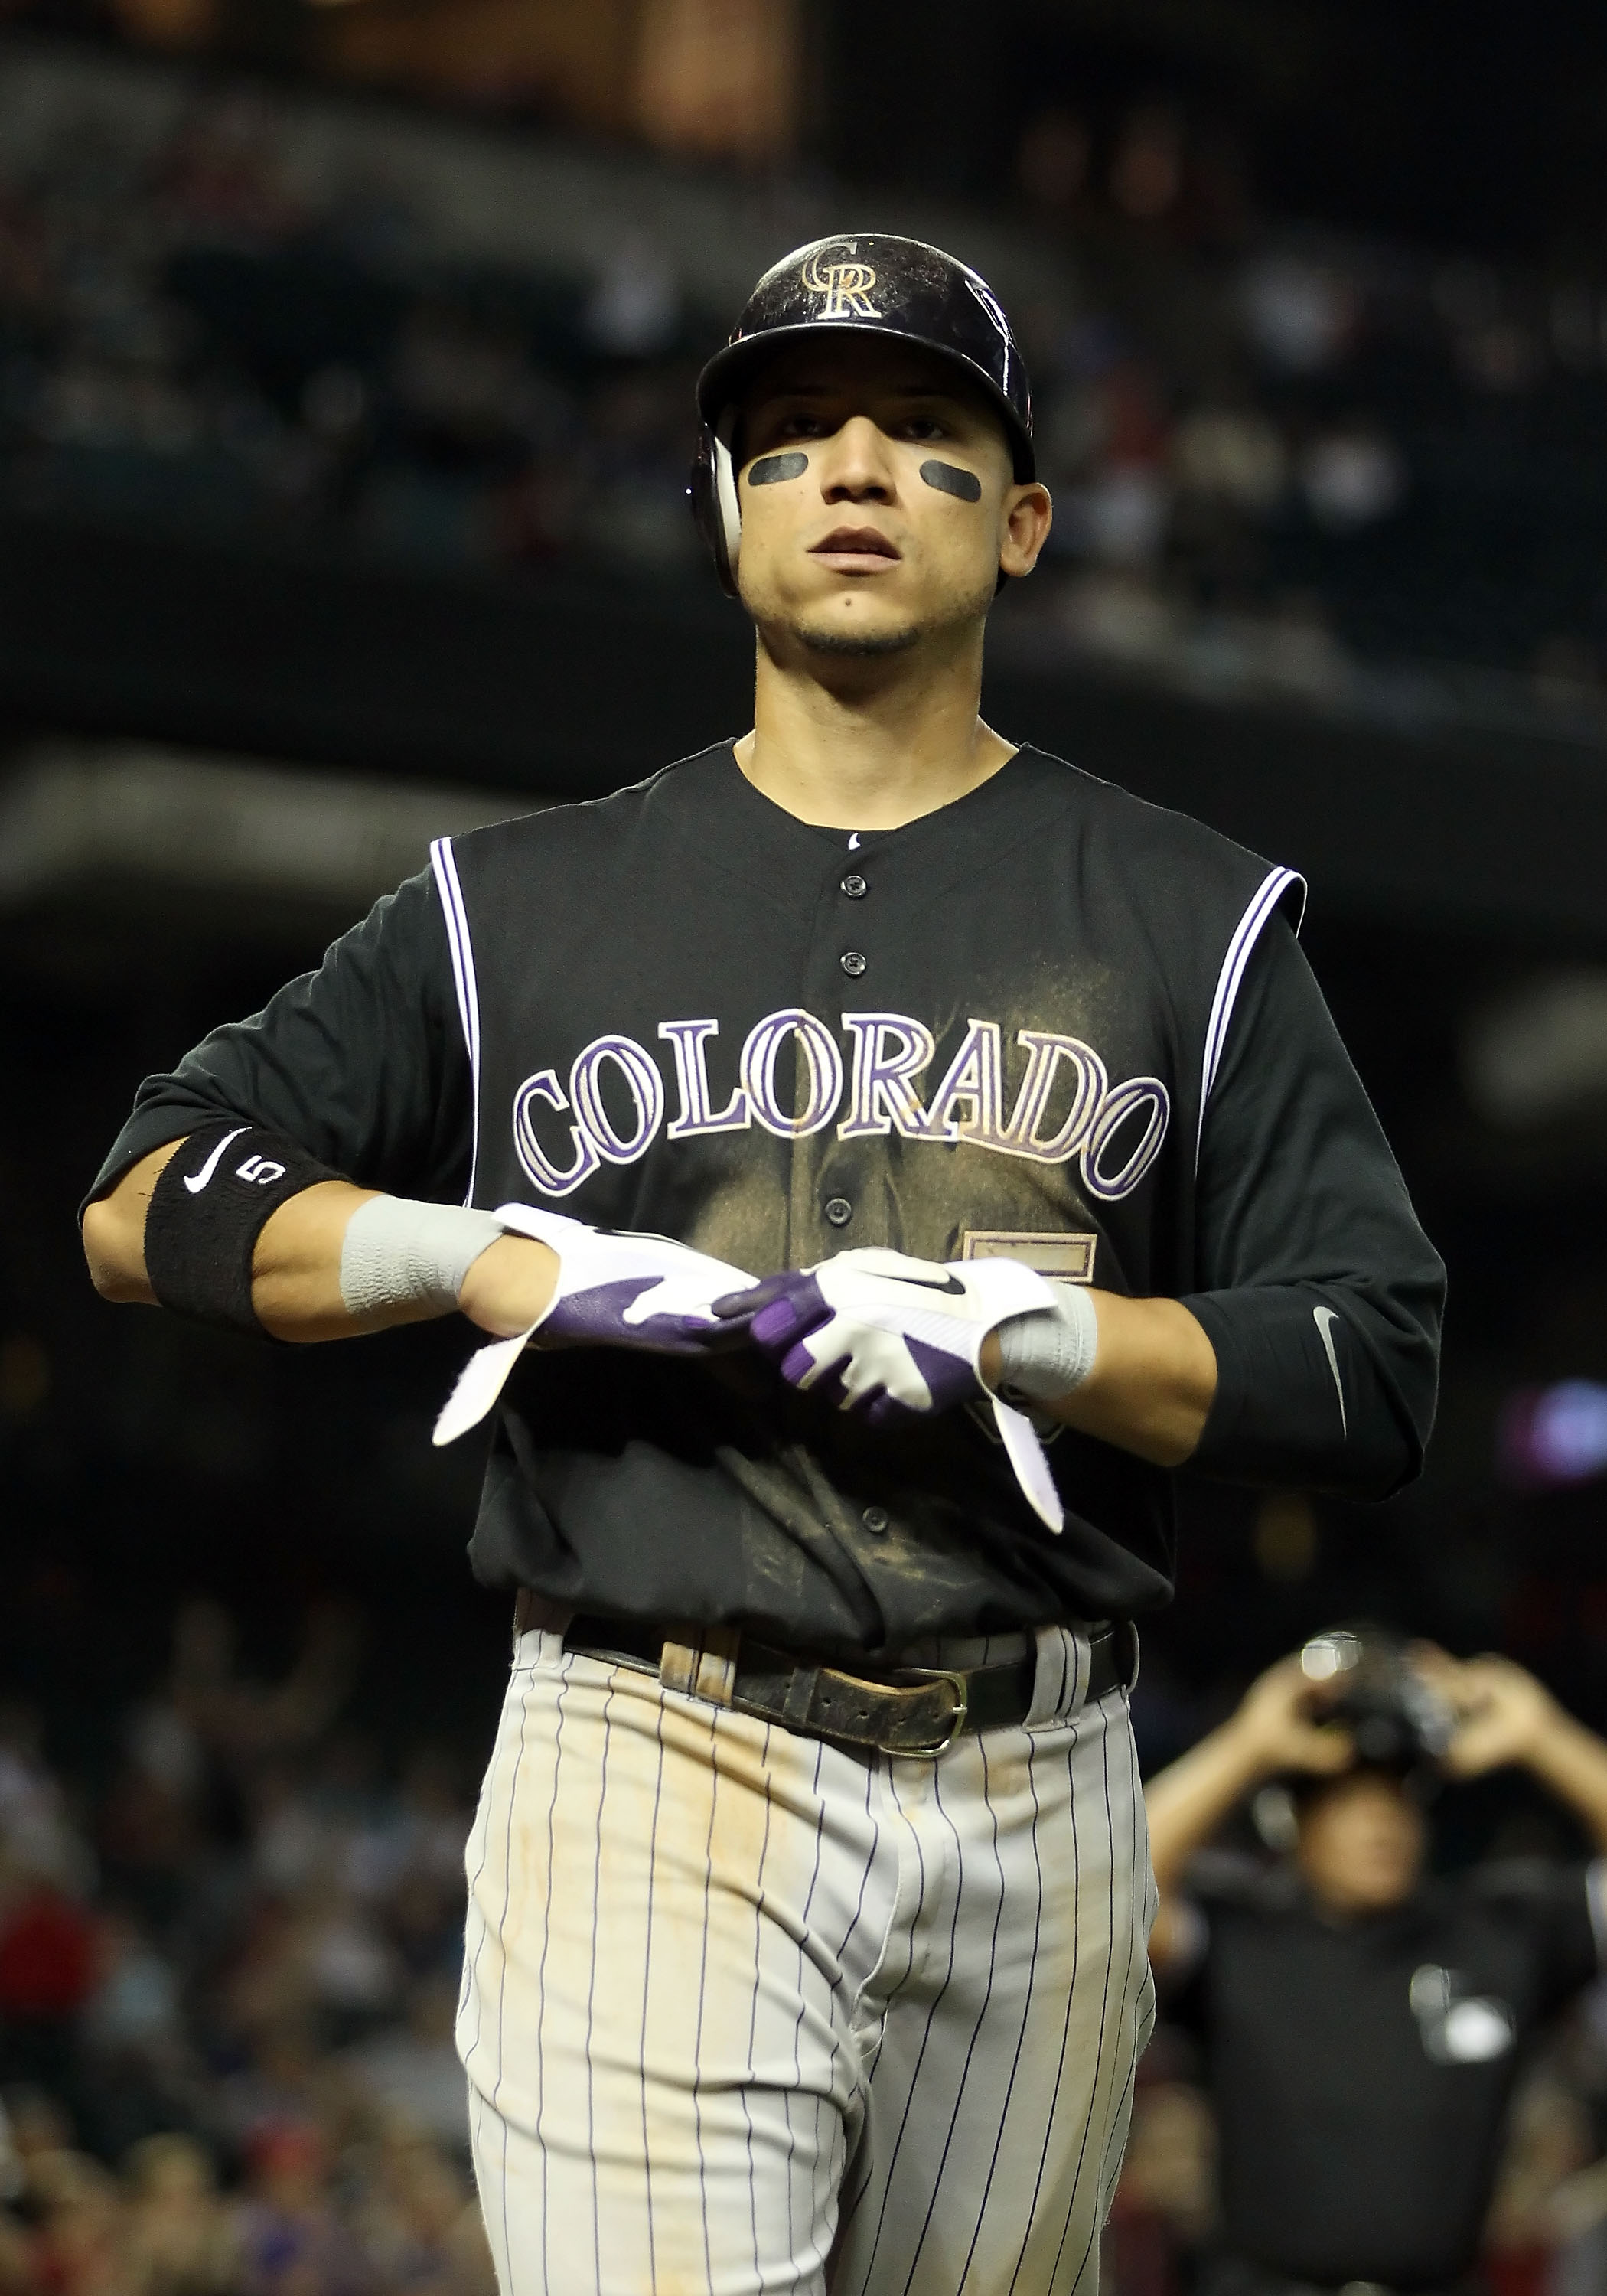 EyeBlack.com - Engineered for athletes • Carlos Gonzalez in our